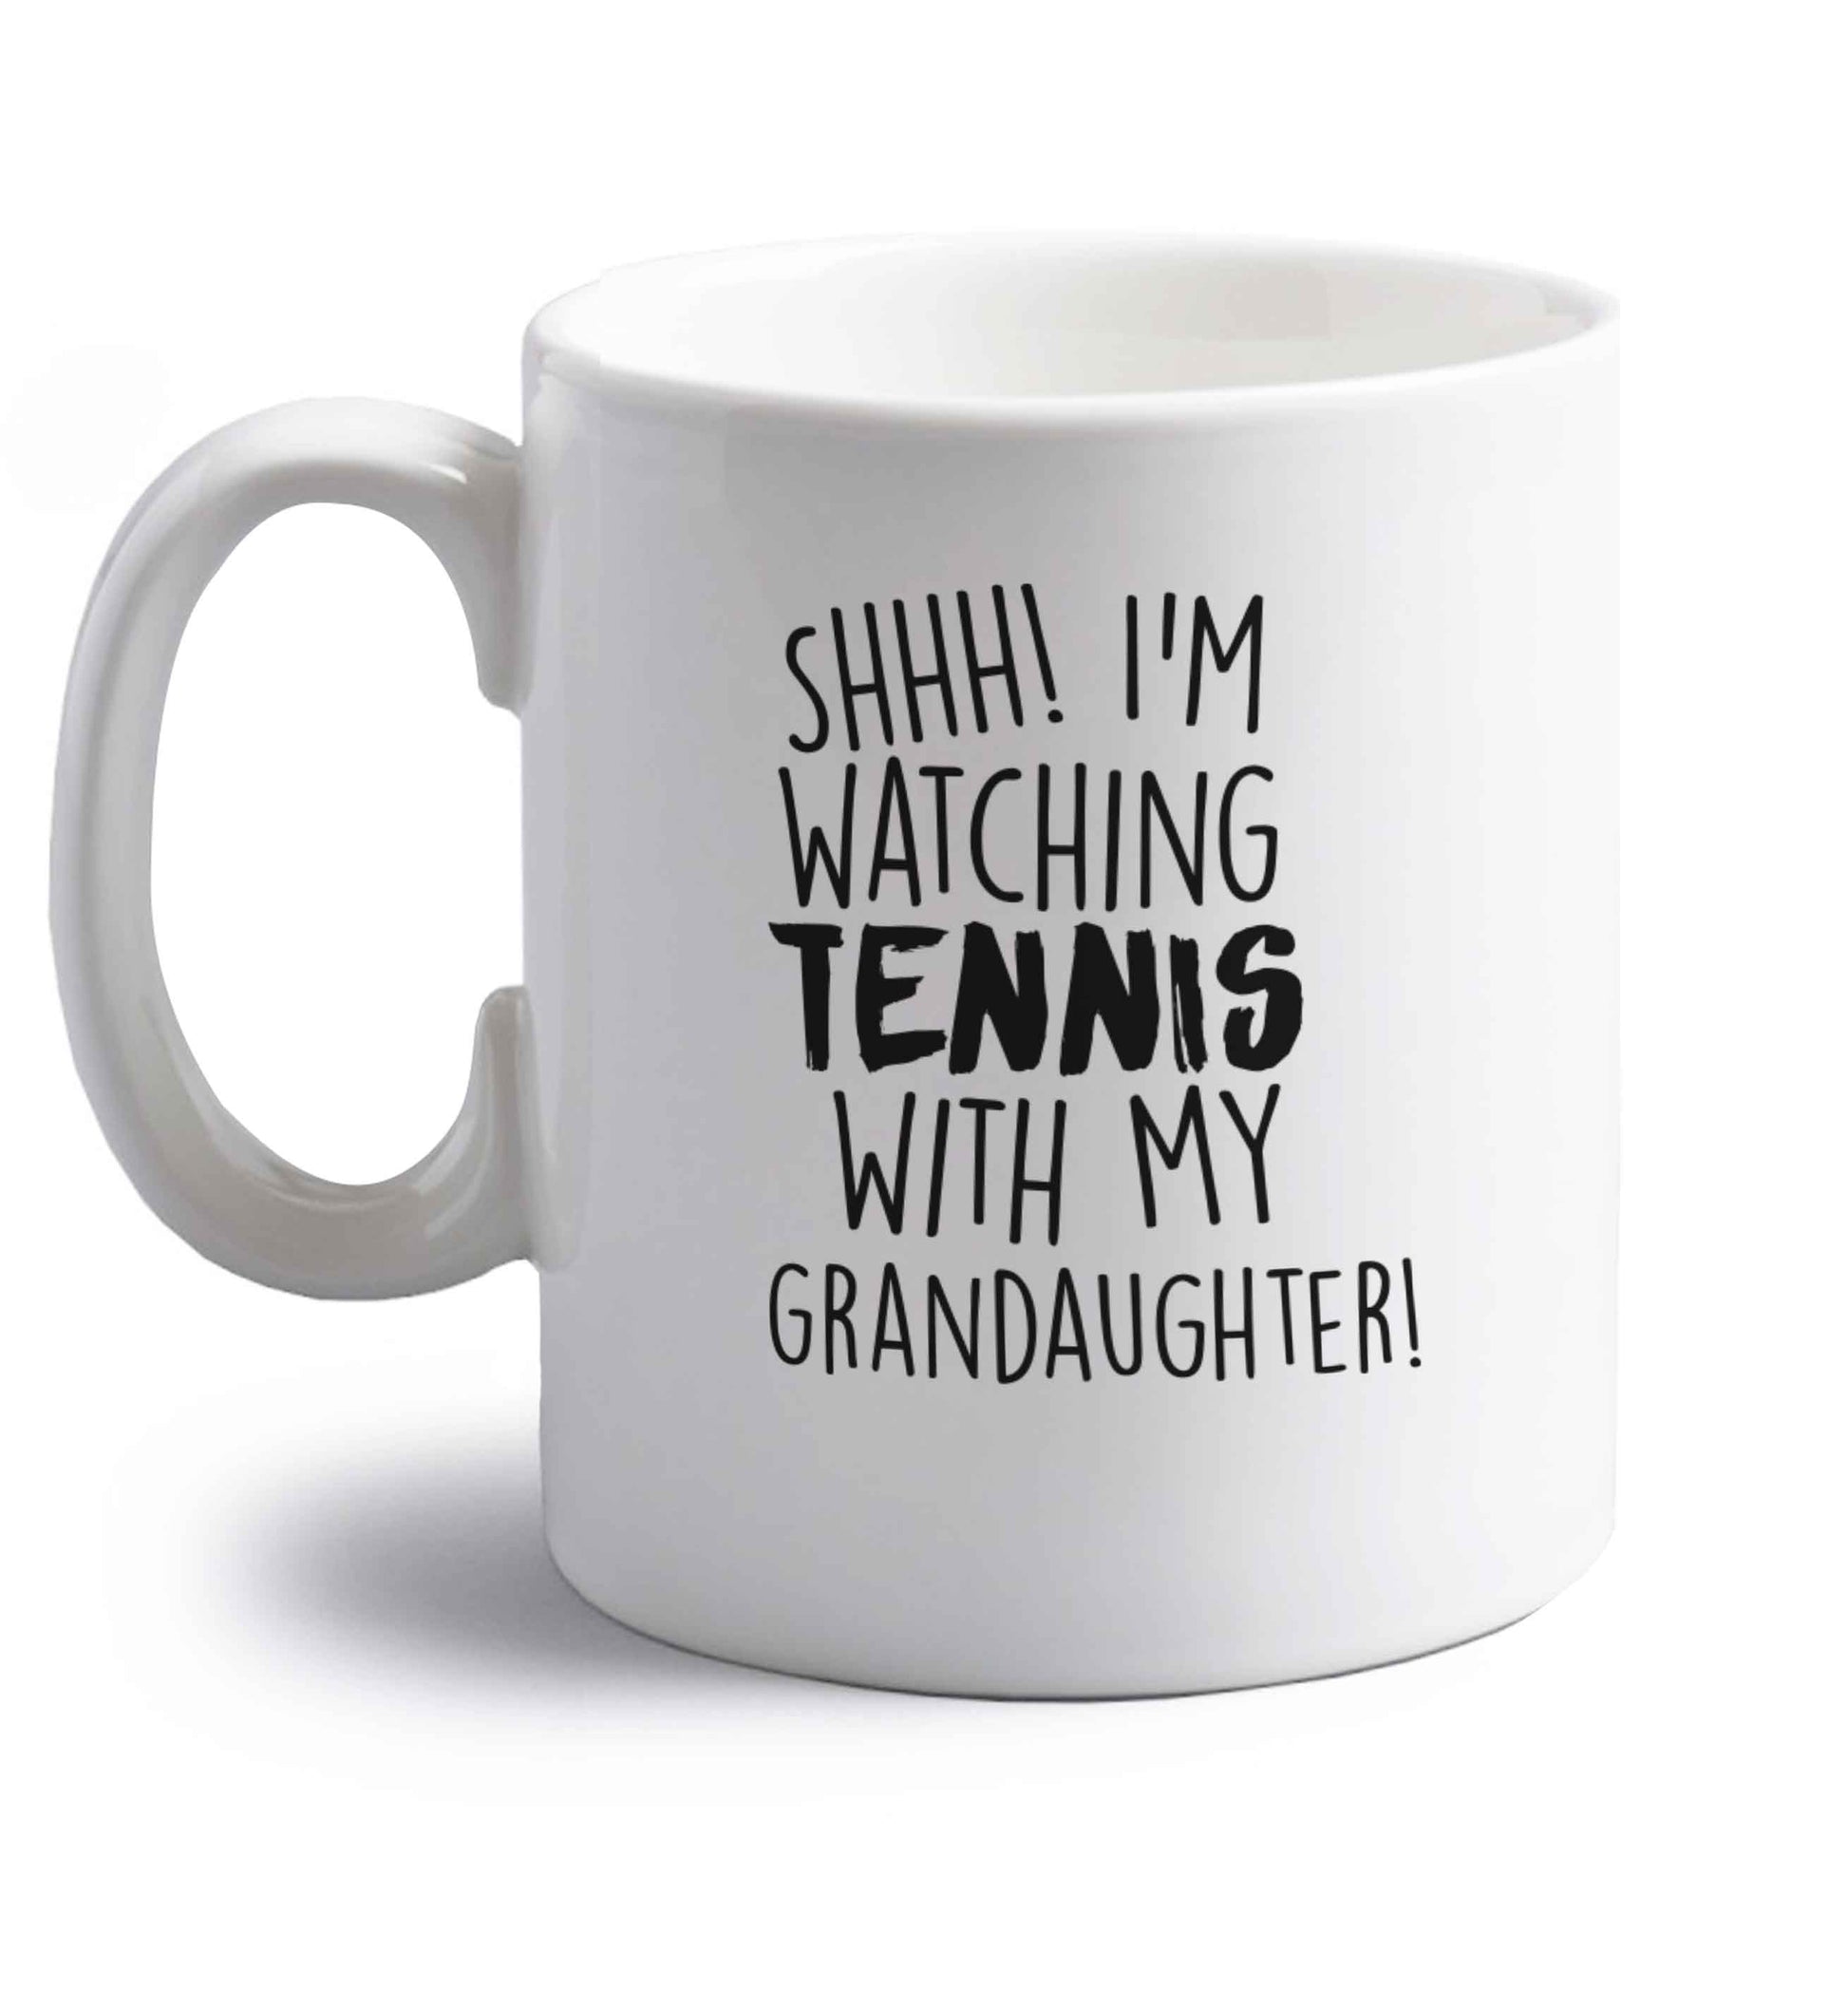 Shh! I'm watching tennis with my granddaughter! right handed white ceramic mug 